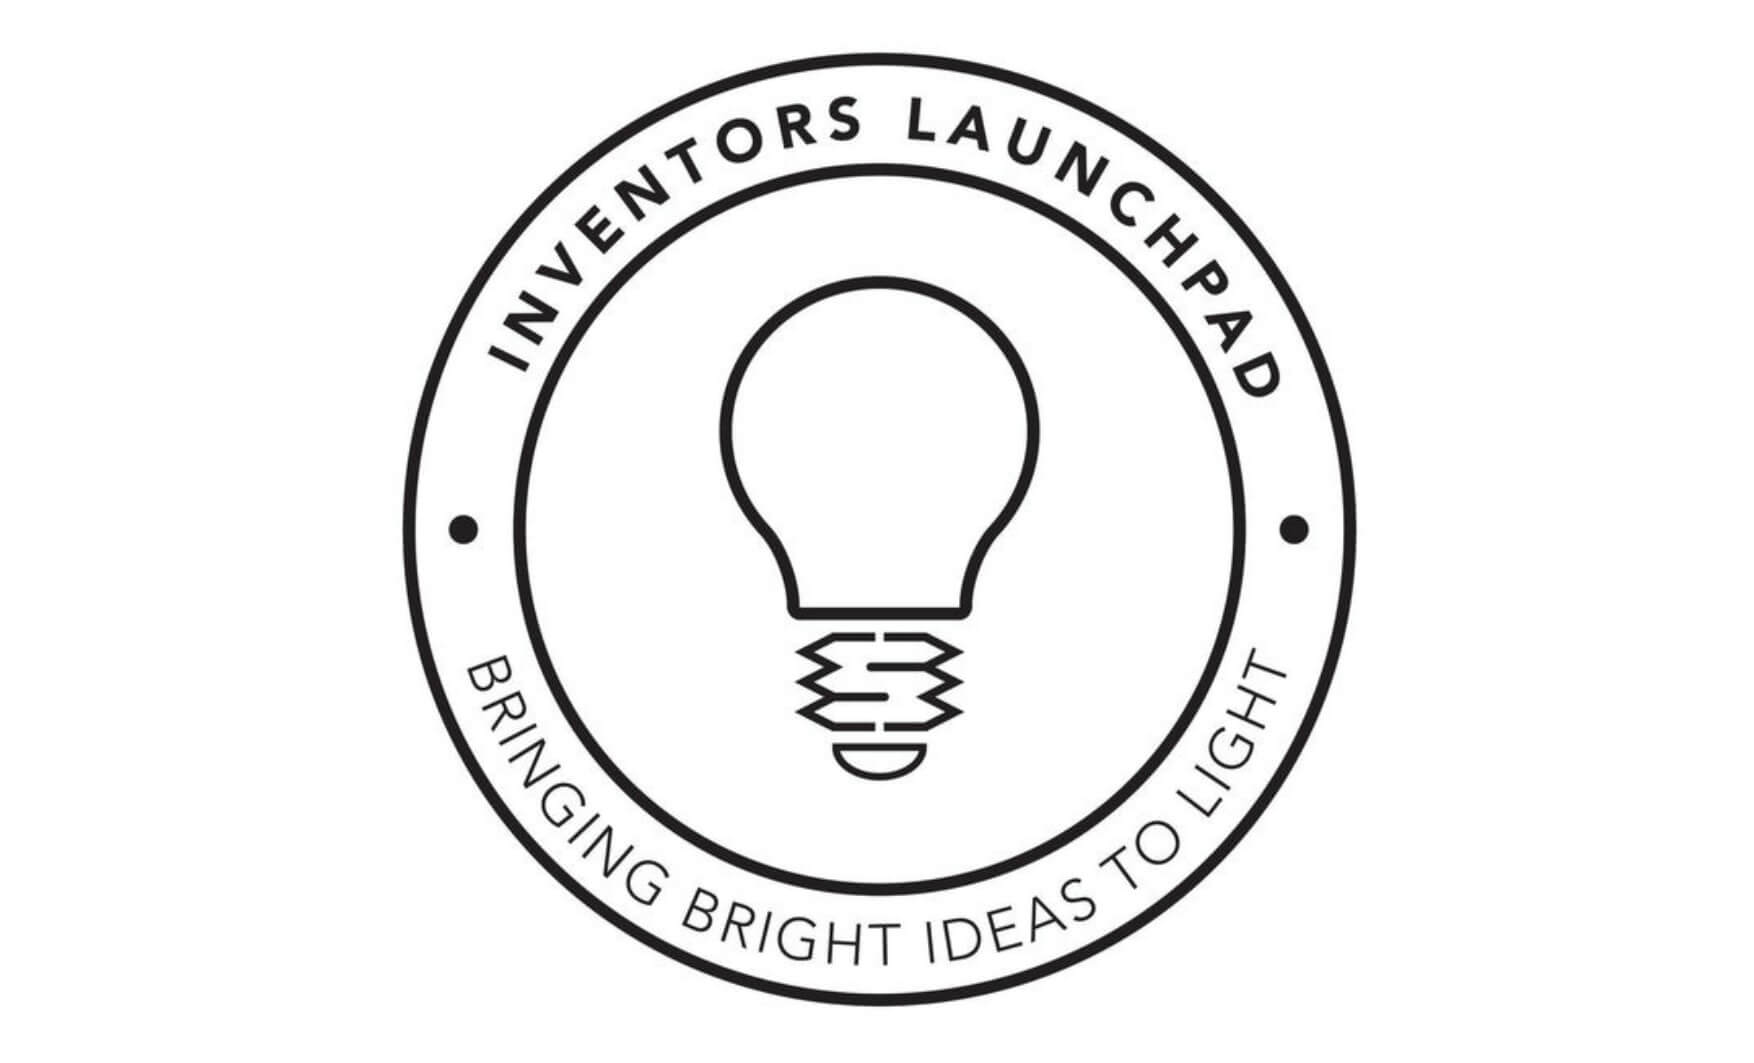 Jared & Karina from The Pitch to Get Rich interview Kevin on the Inventor’s Launchpad Podcast